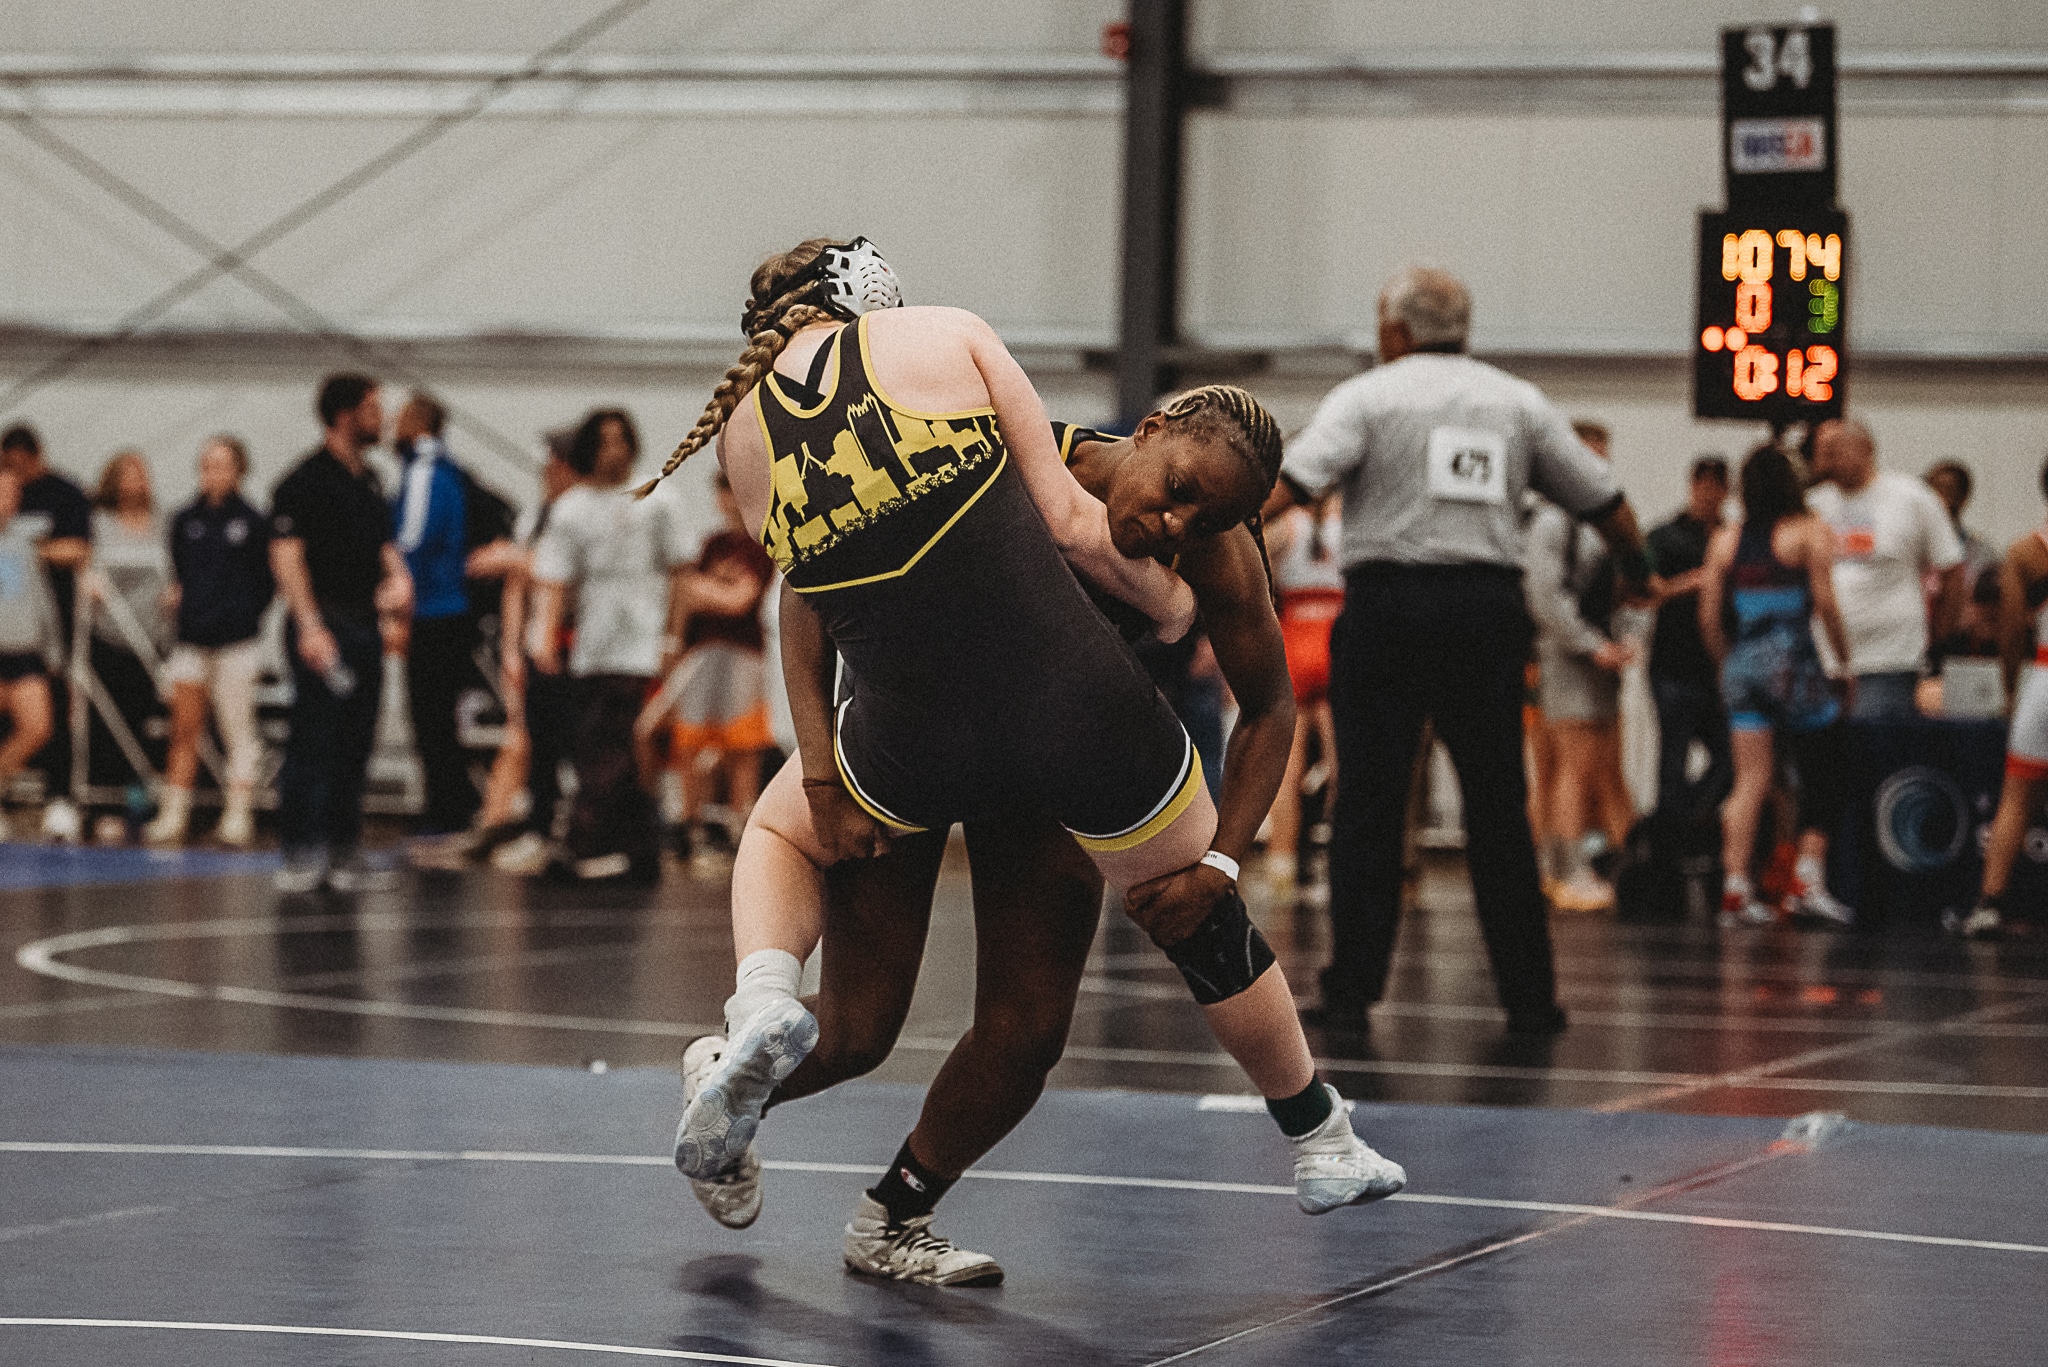 Olivia Brown takes her opponent down at the 2023 High School National Championship in Virginia Beach, VA.